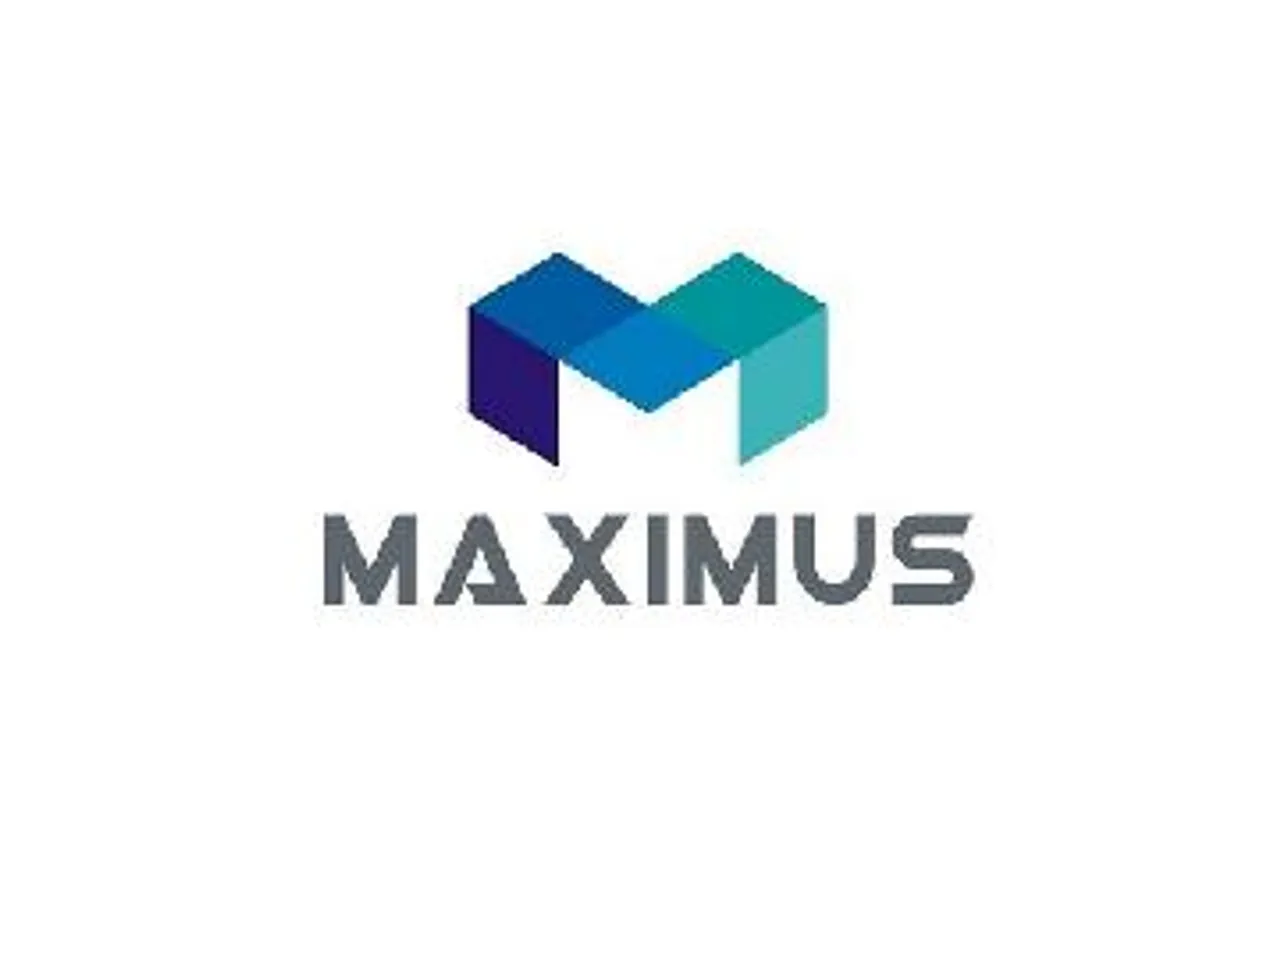 Maximus Group Acquires 100 Percent Control of Its Manufacturing Step-down Subsidiary in Kenya